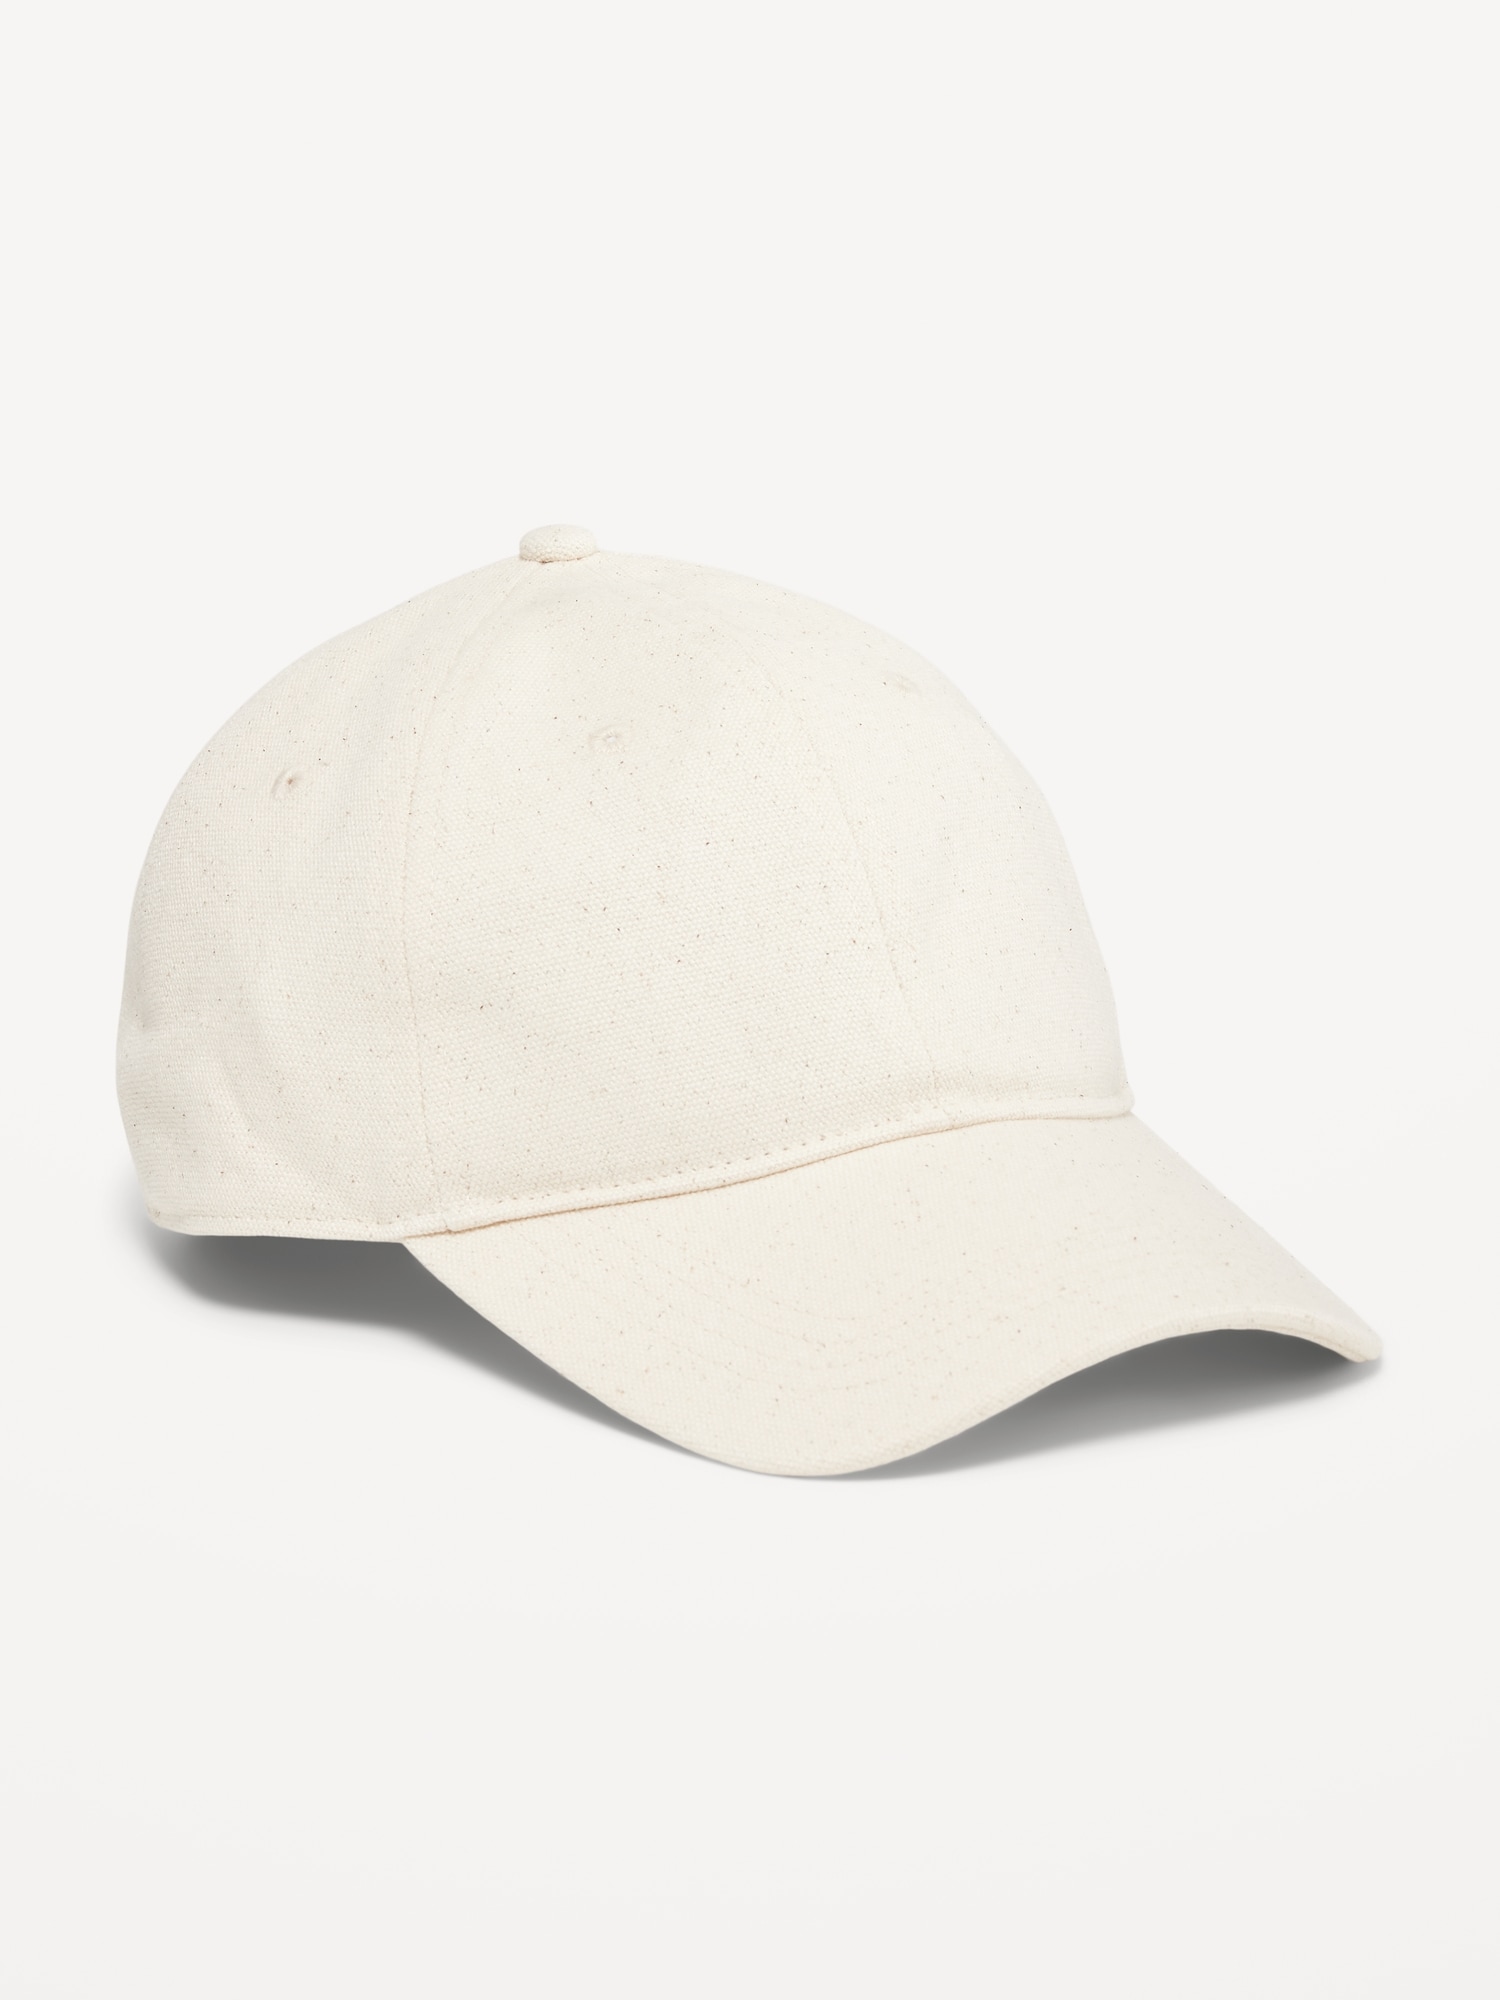 Old Navy Women's Canvas Baseball Cap - - One Size